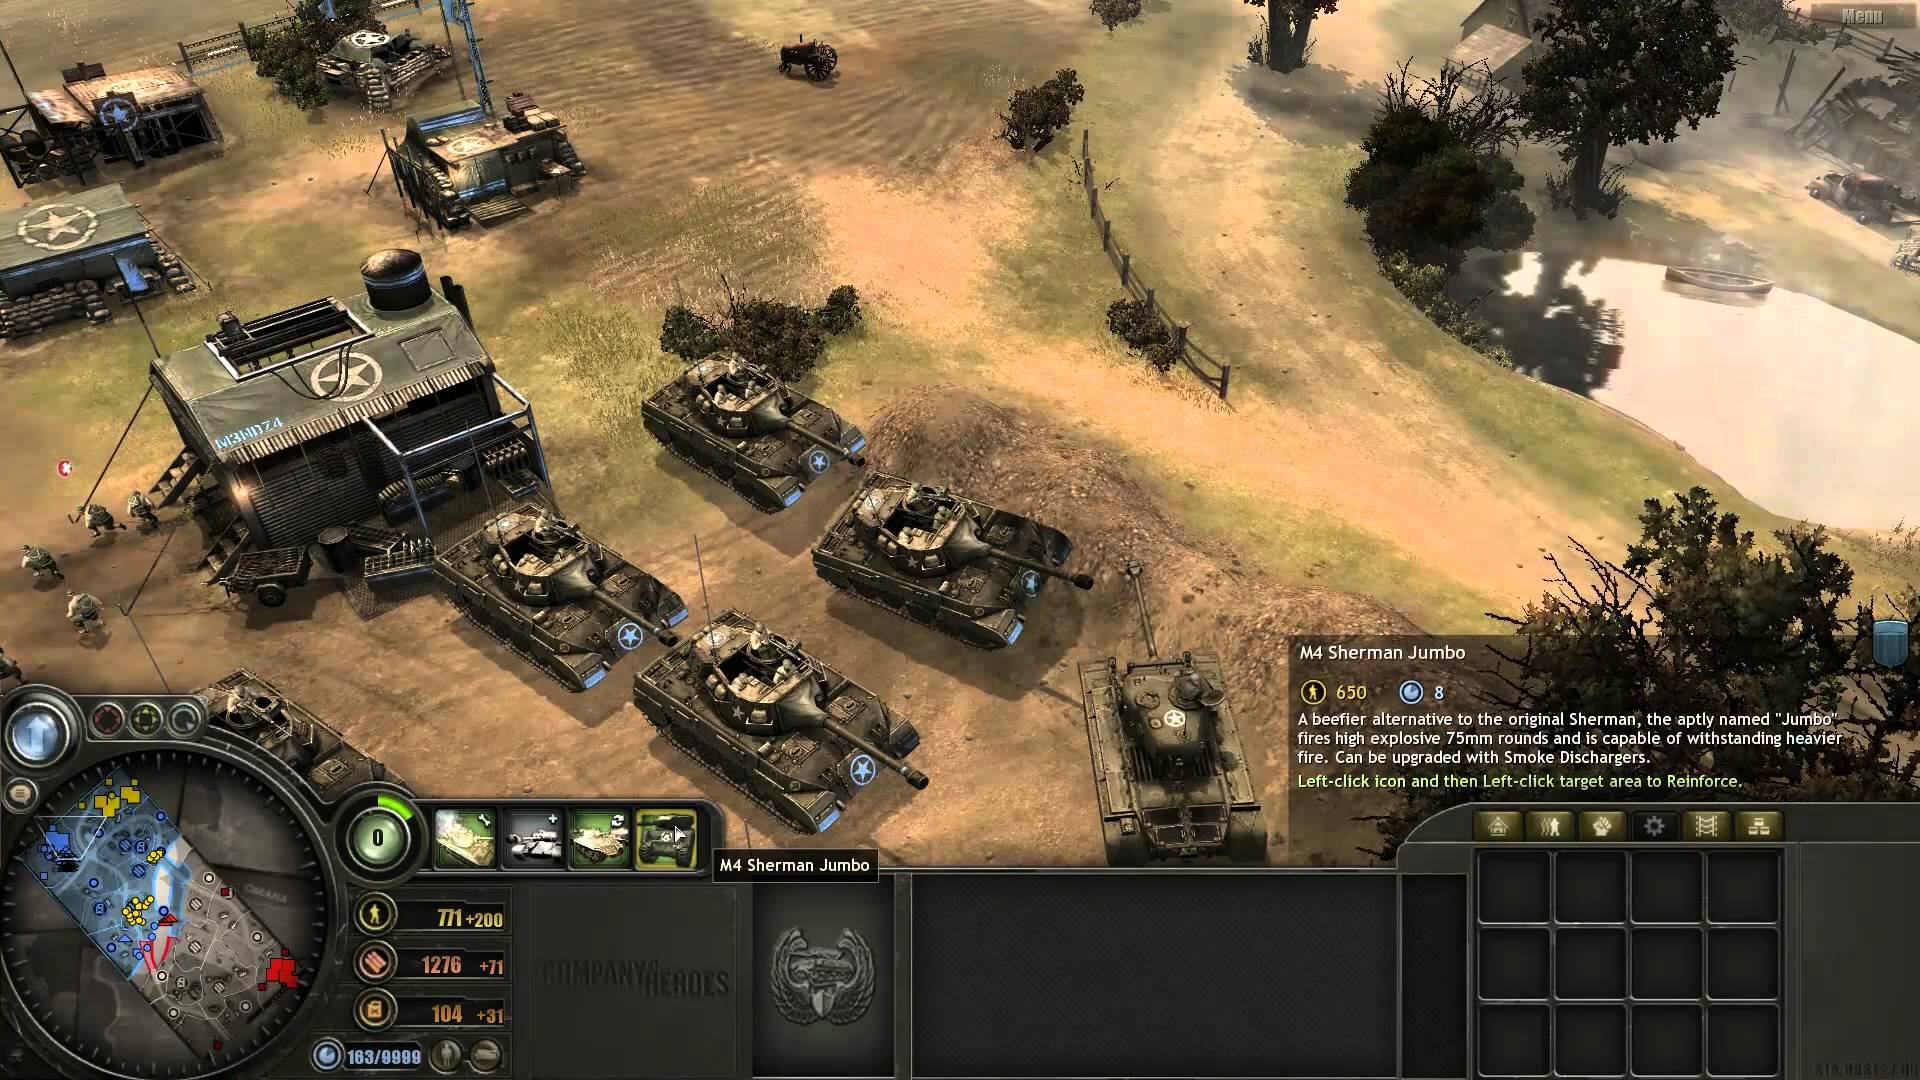 company of heroes 2 v4.0.0.21748 trainer game copy world